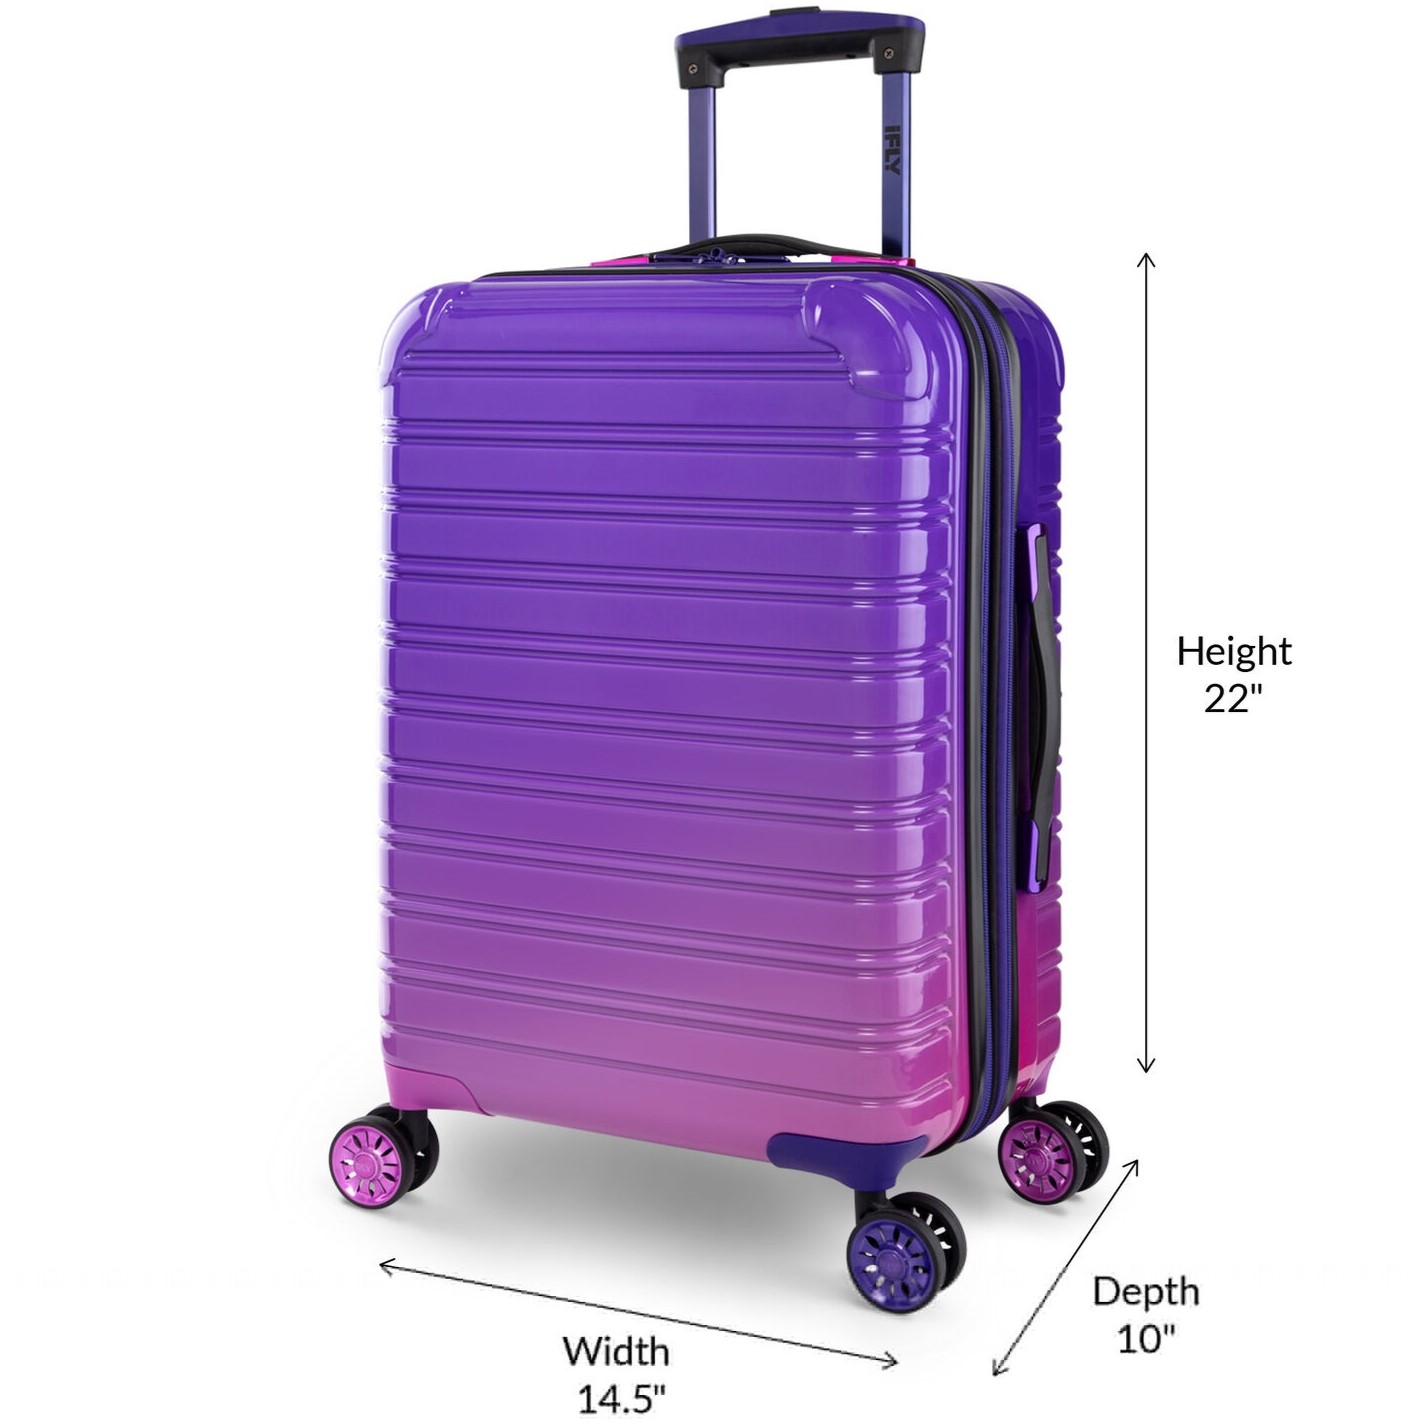 VALI MÀU TÍM LOANG DU LỊCH IFLY FIBERTECH OMBRE HARDSIDE LUGGAGE IN MIDNIGHT BERRY 1